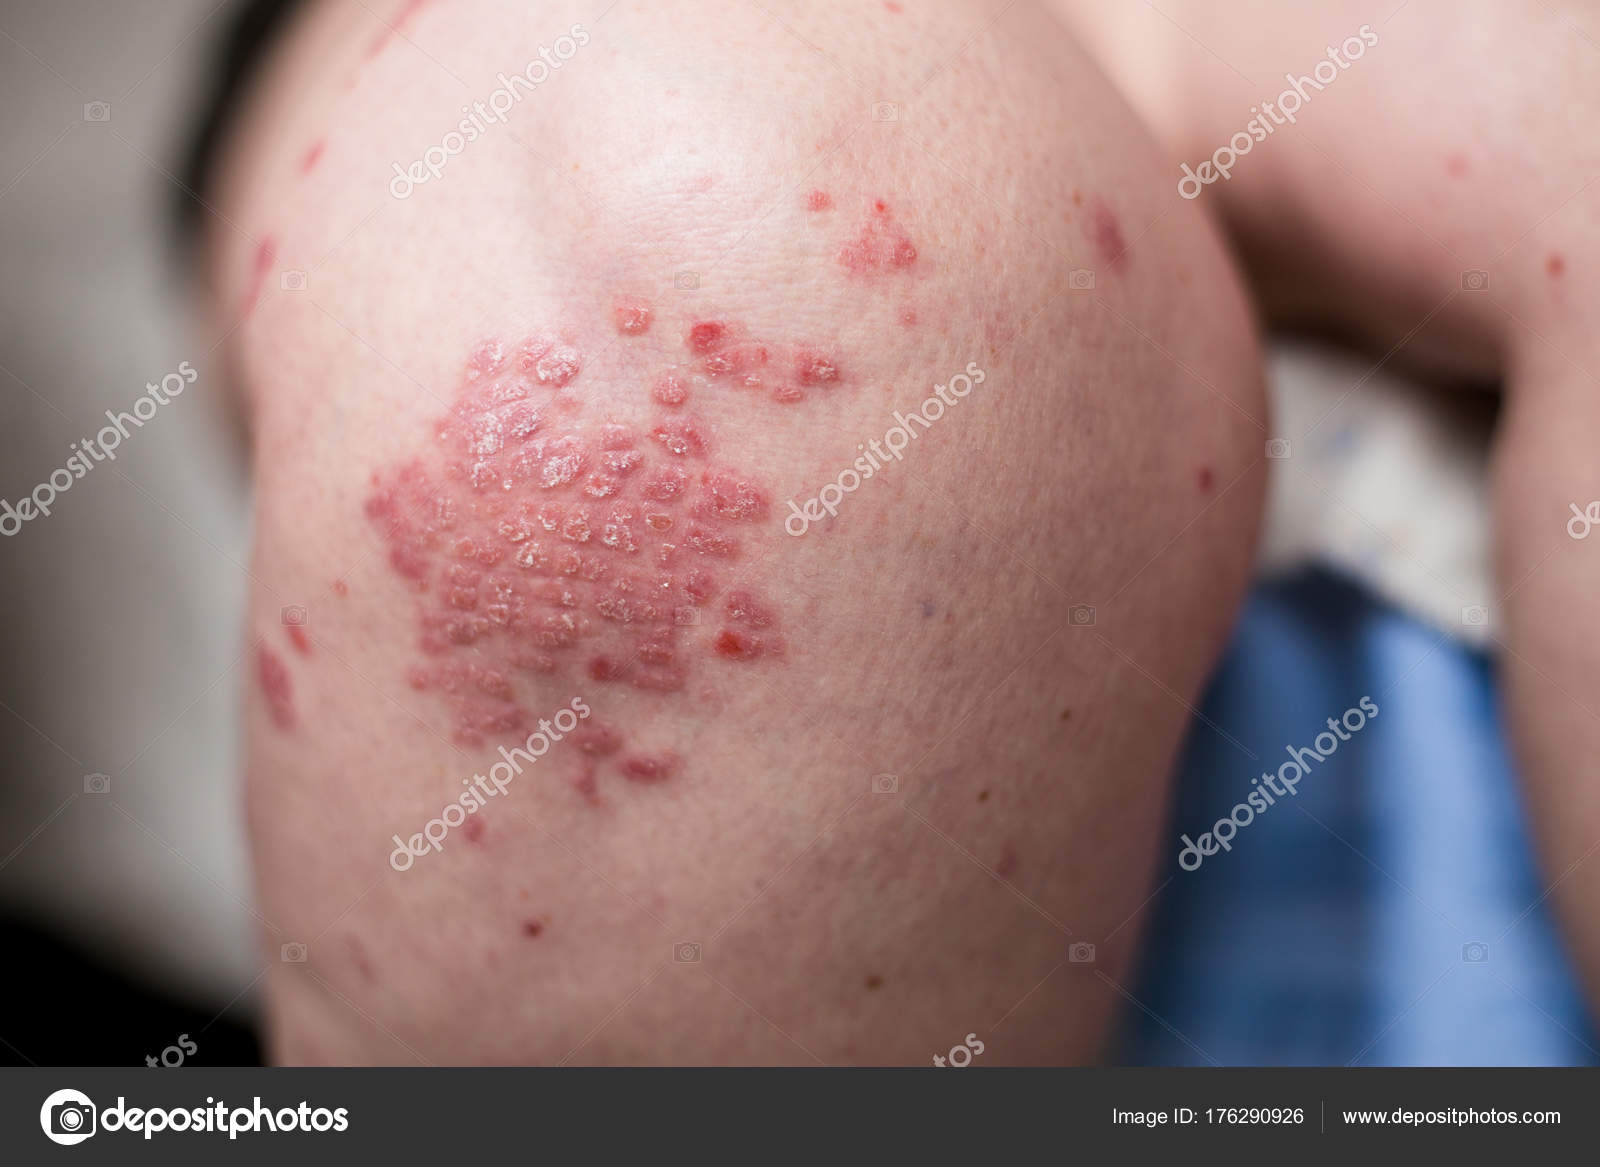 psoriasis and dermatitis together)